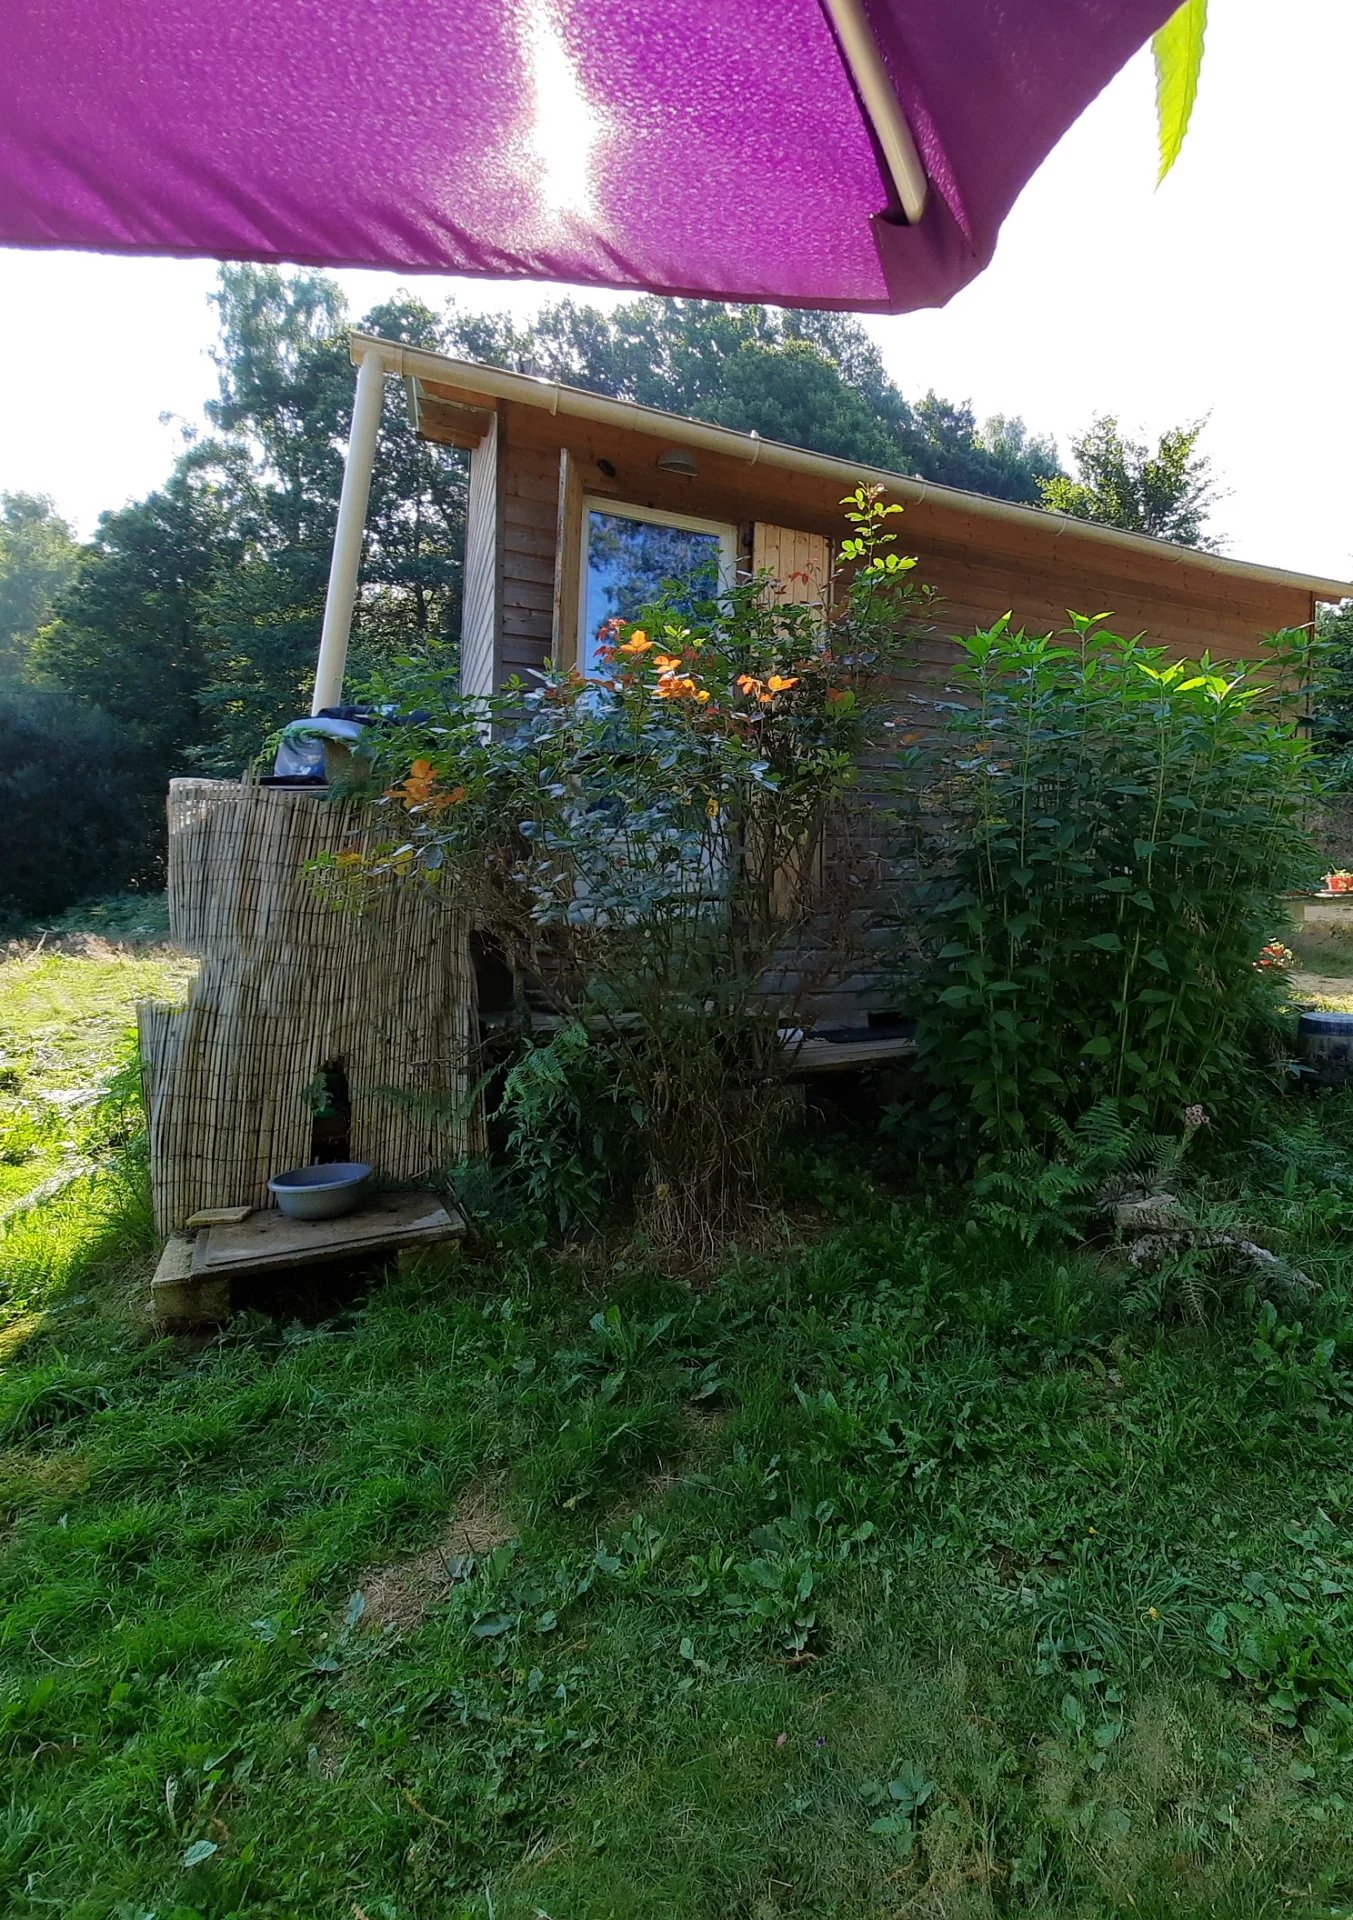 Between Tulle and Brive Tiny House in a secluded place